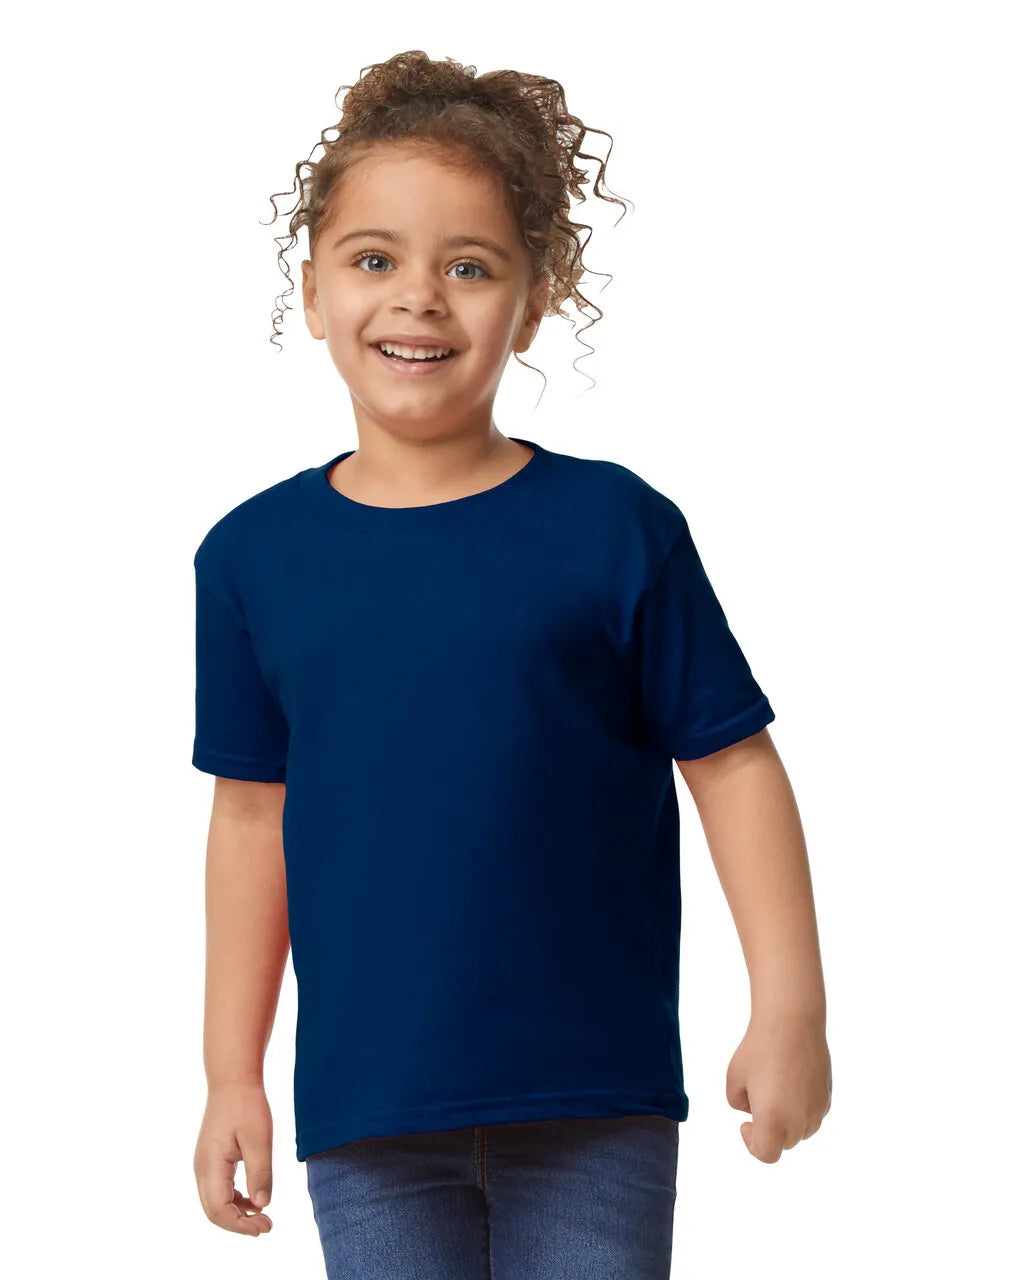 Toddlers Tshirts